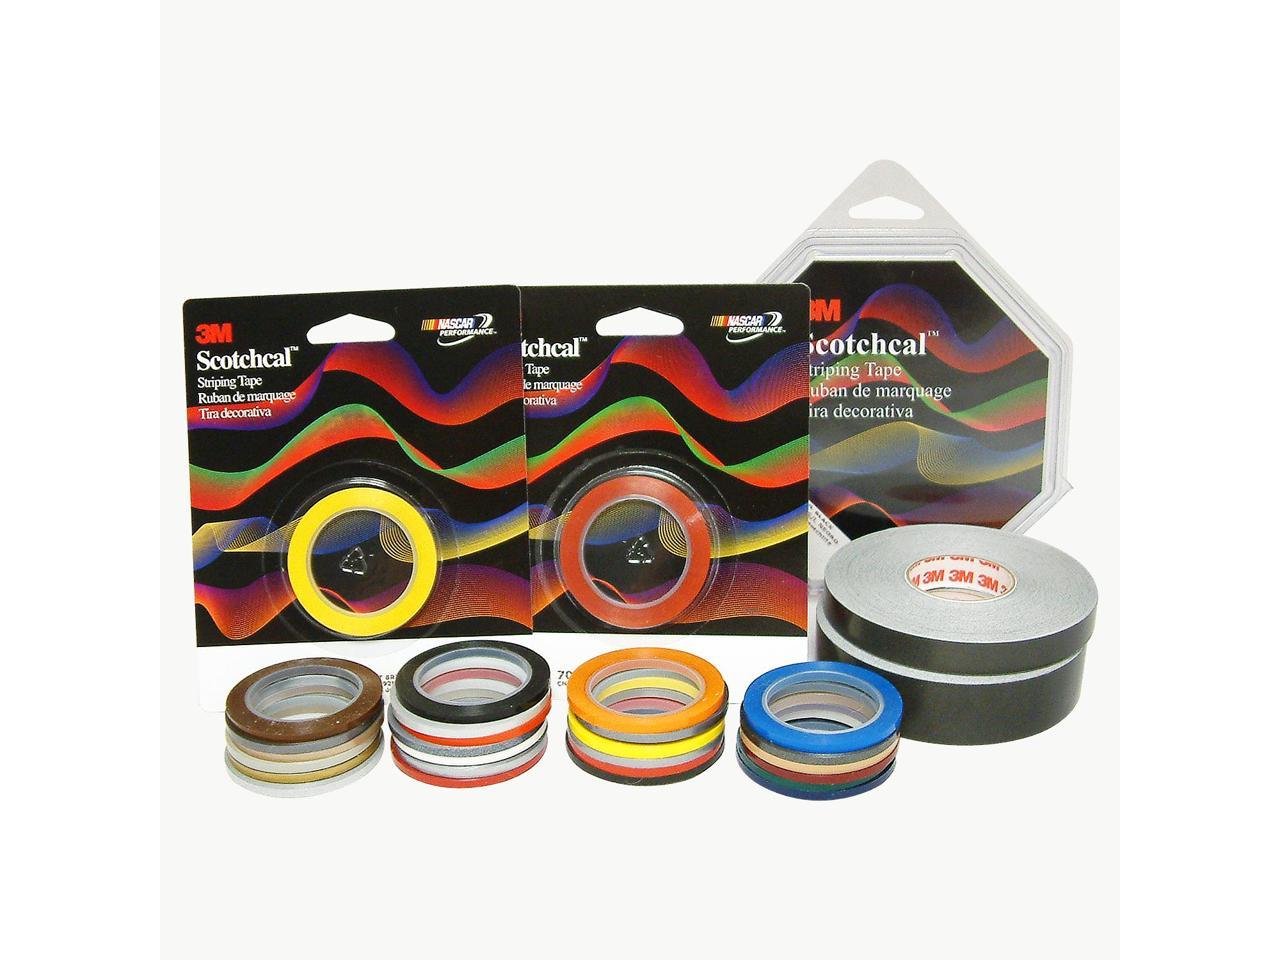 White x 40 ft. 3M Scotch Scotchcal Striping Tape 1/16 in 